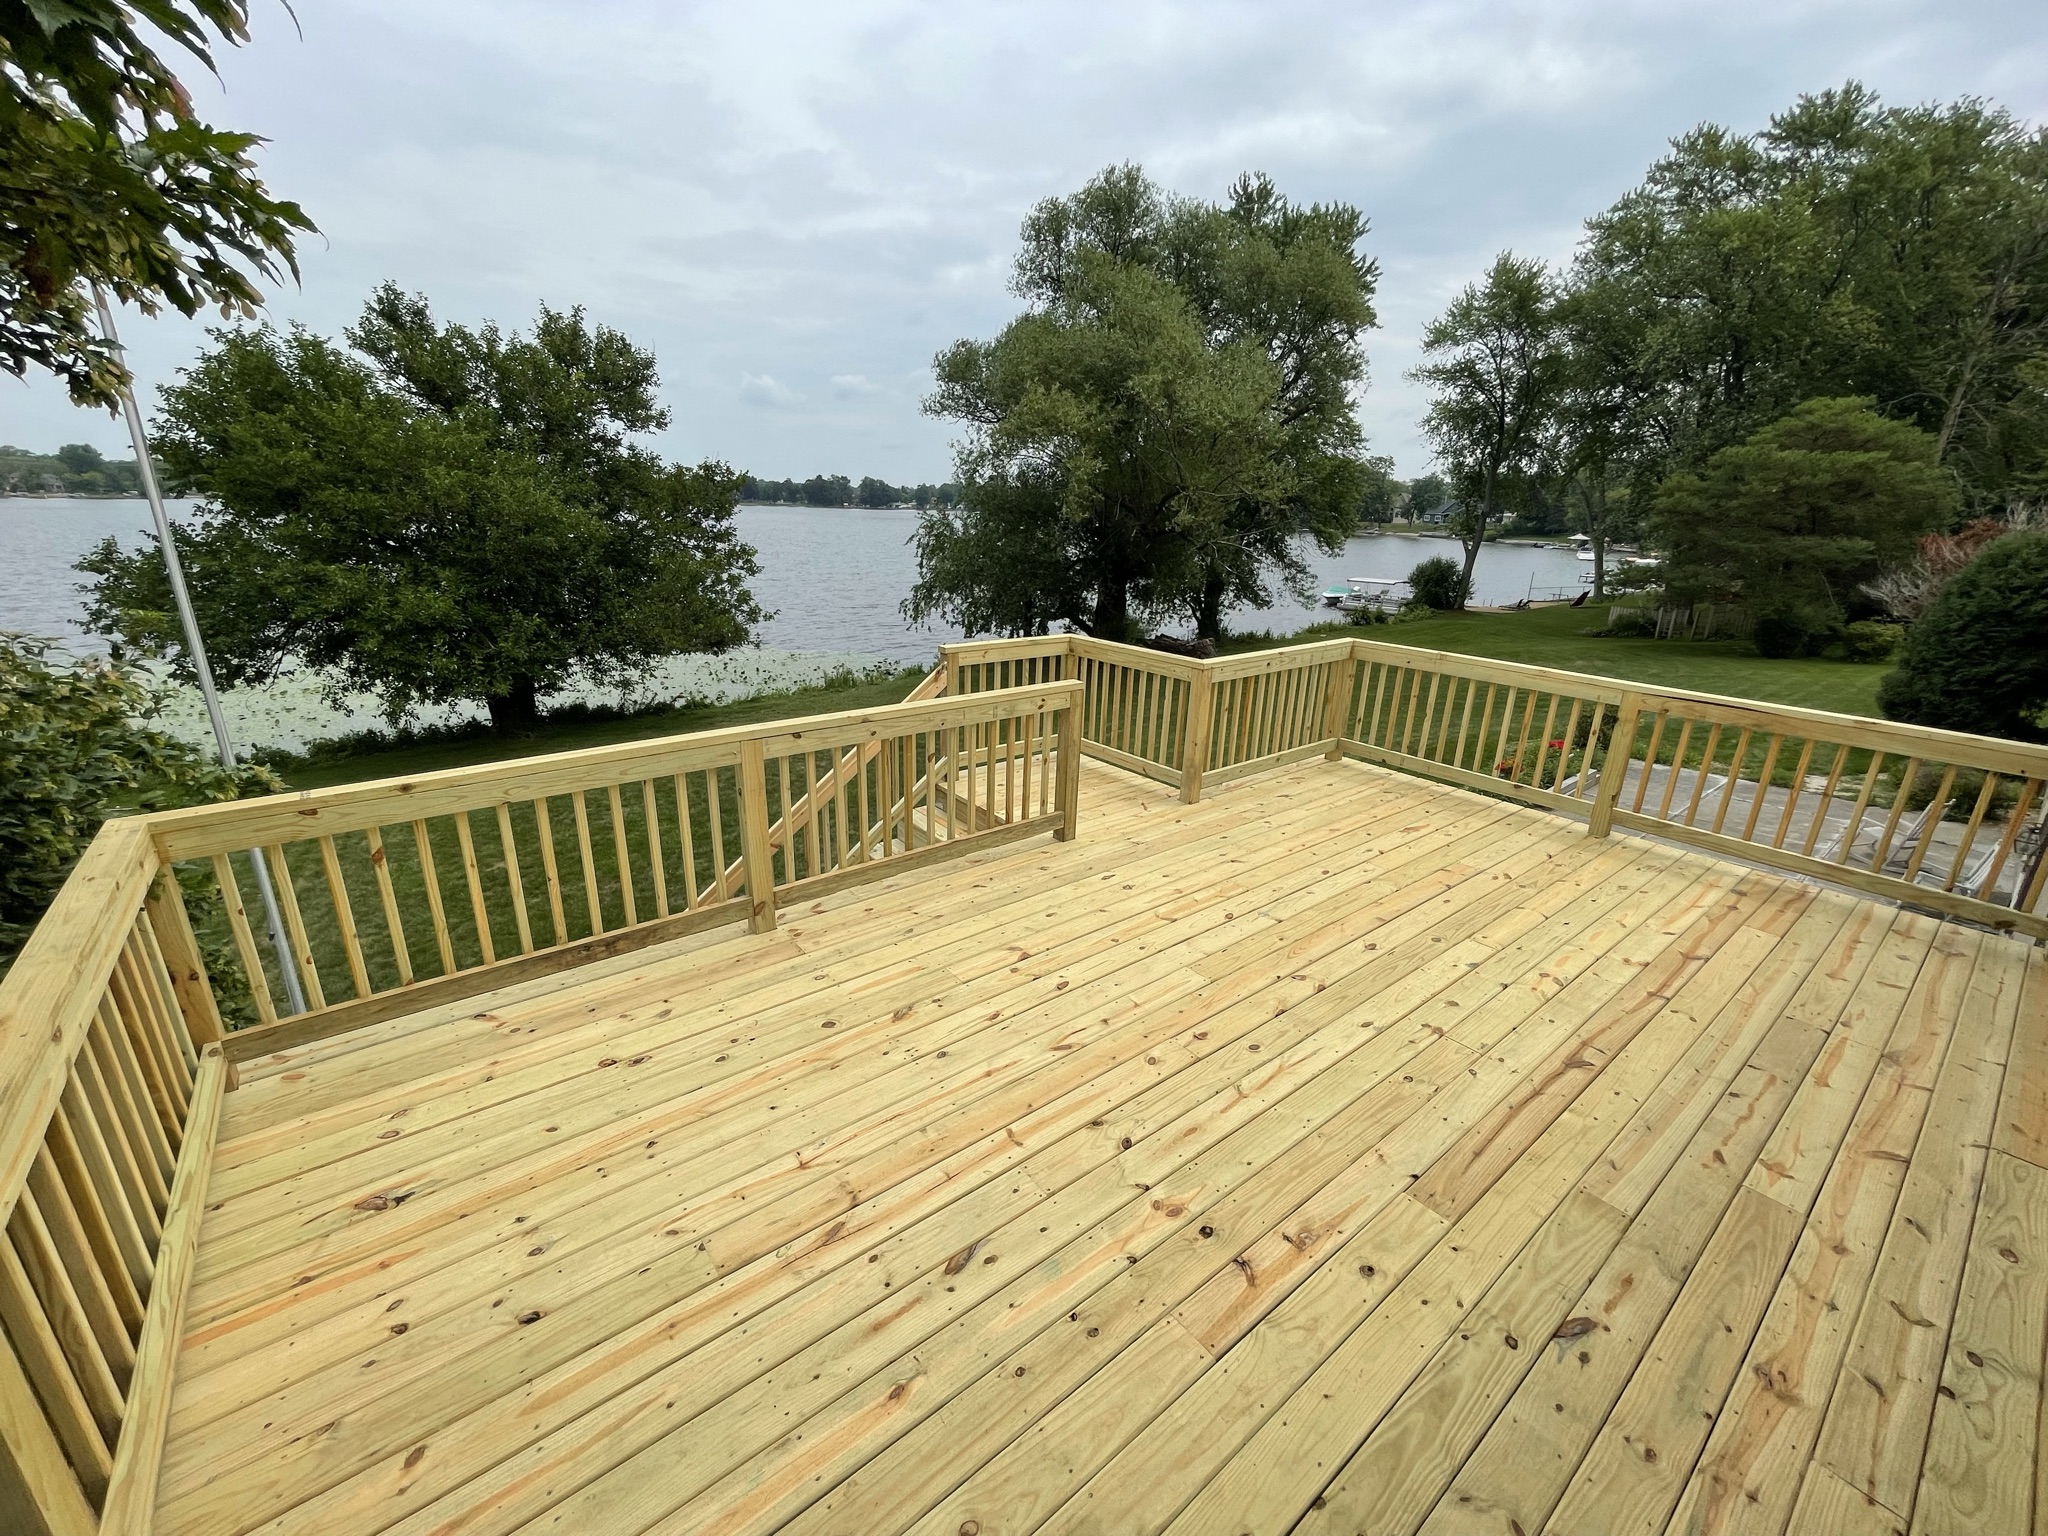 A new wooden decking boards overlooking a tranquil lake with lush greenery on the banks.